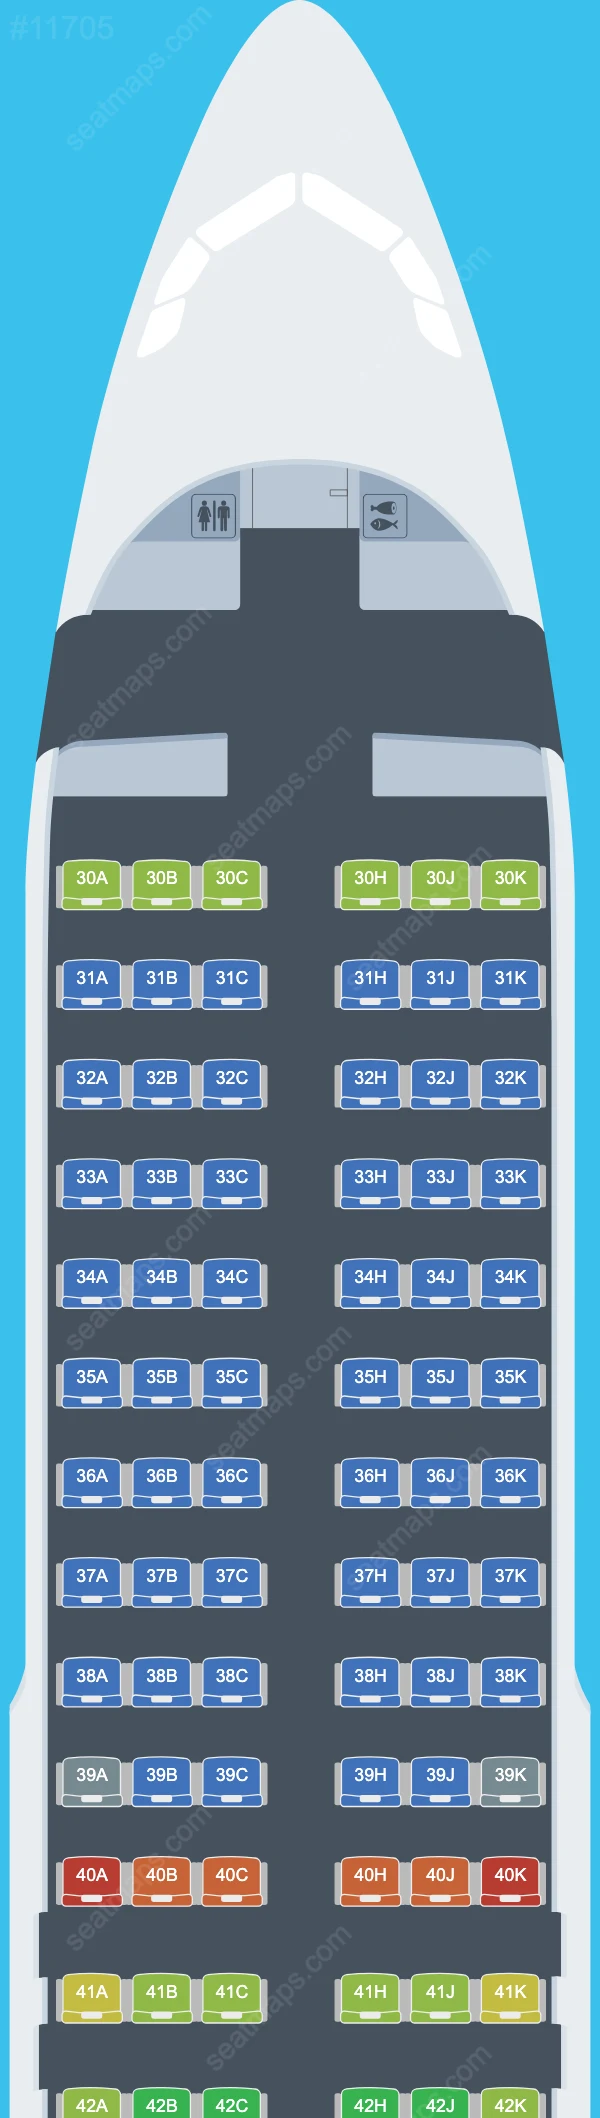 Sichuan Airlines Airbus A320-200neo V.1 seatmap preview